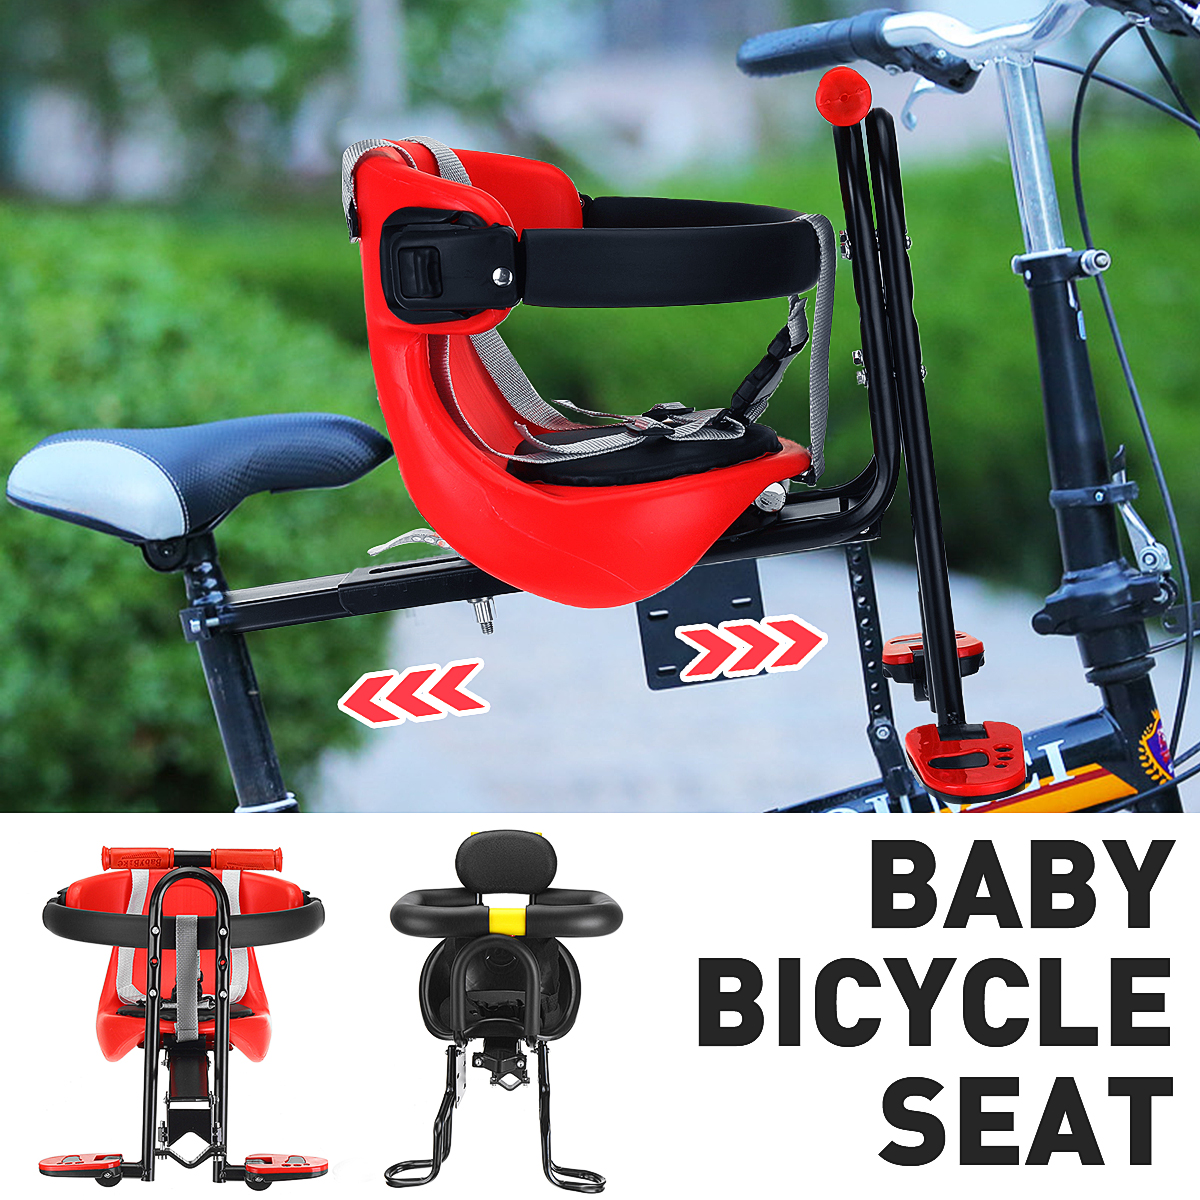 Folding-Child-Bicycle-Safety-Seat-Mountain-Road-Bike-Front-Chair-Saddle-Kids-Soft-Cushion-1781521-1